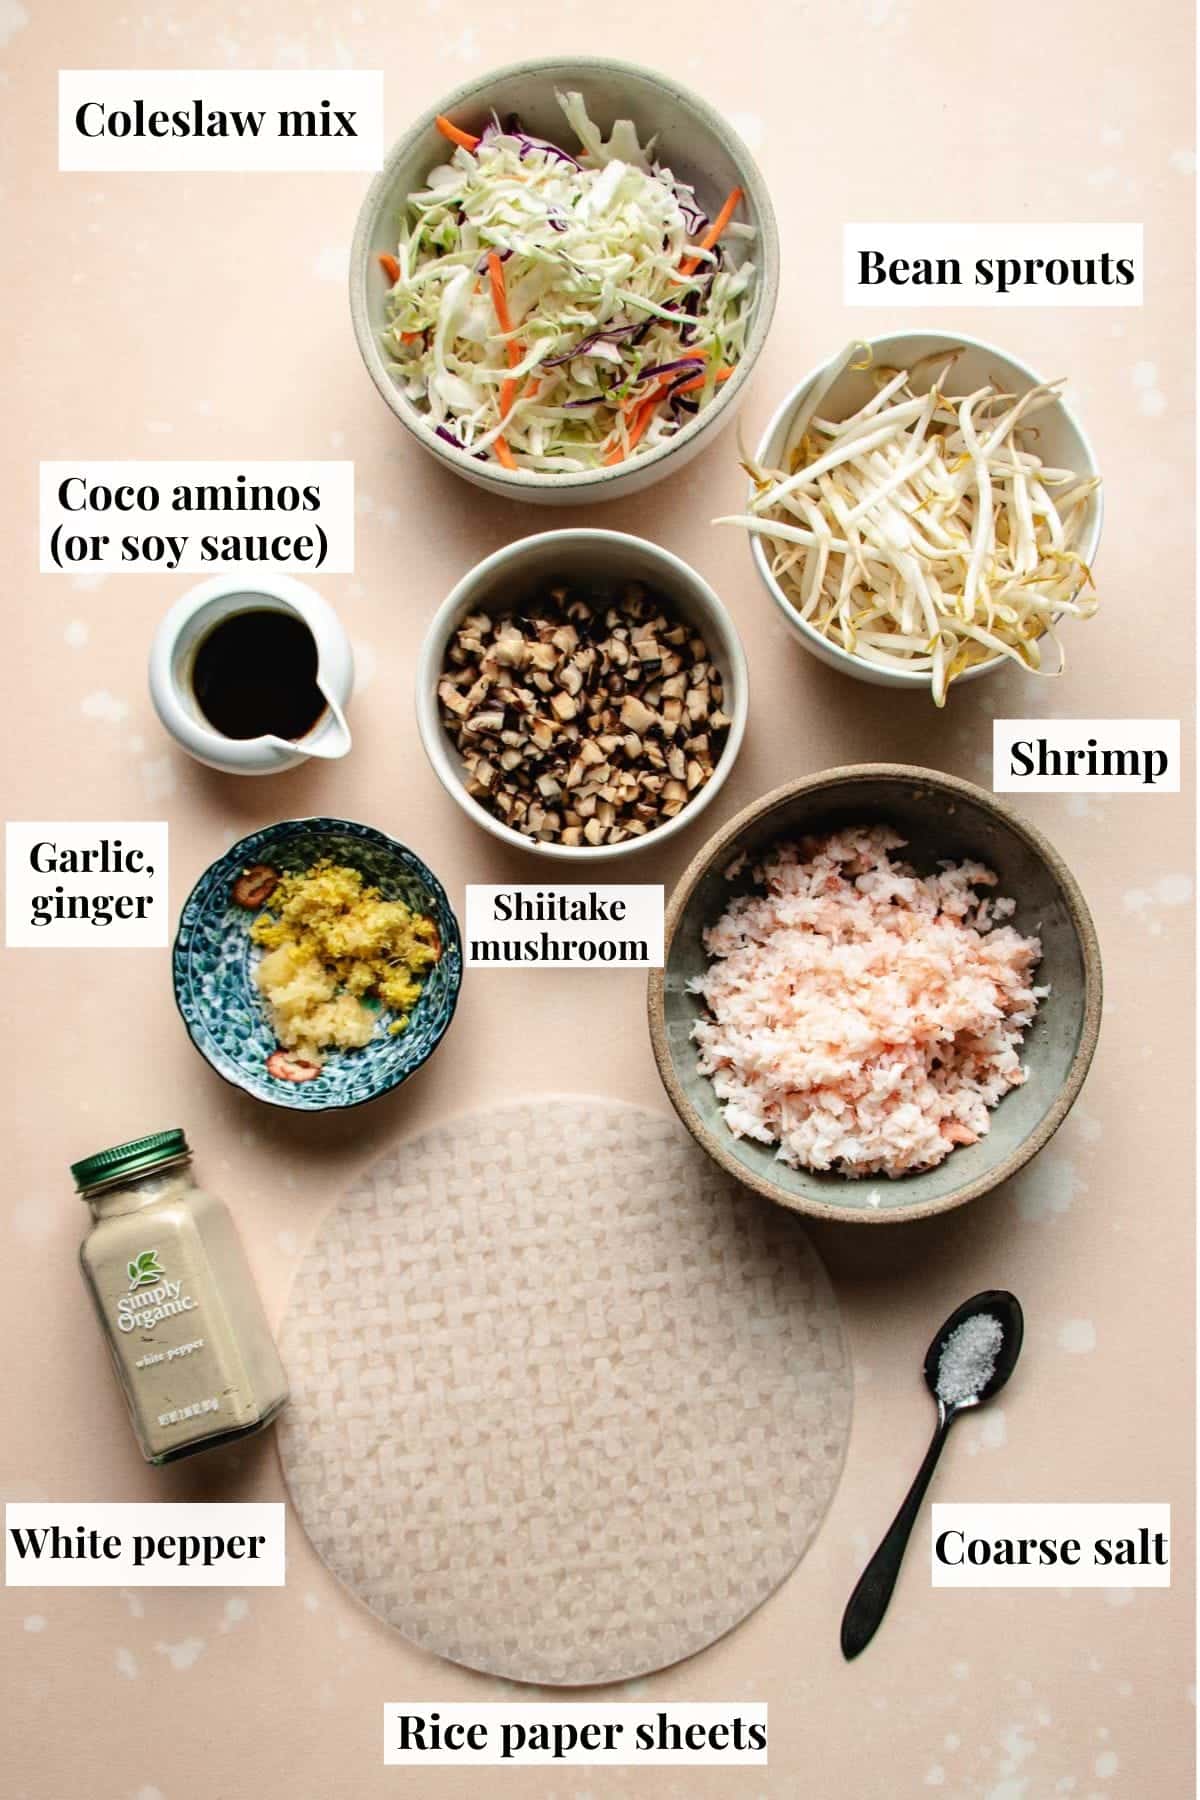 Ingredients used to make rice paper wrapper and egg roll filling.